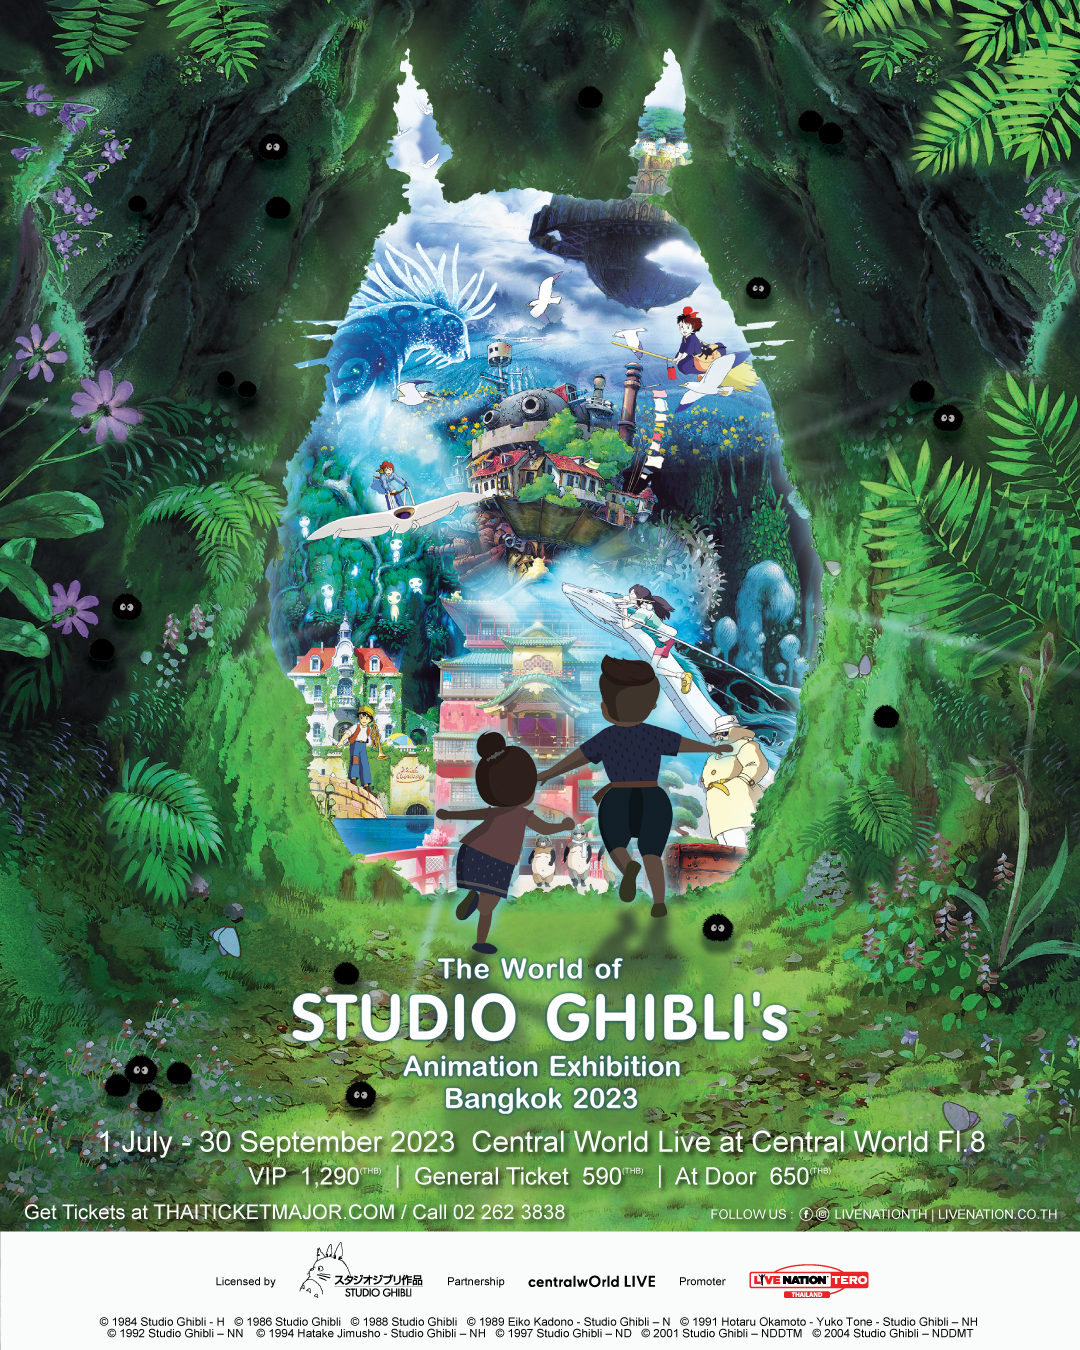 Now opening! The biggest Studio Ghibli’s exhibition in SEA ‘THE WORLD OF STUDIO GHIBLI'S ANIMATION EXHIBITION BANGKOK 2023